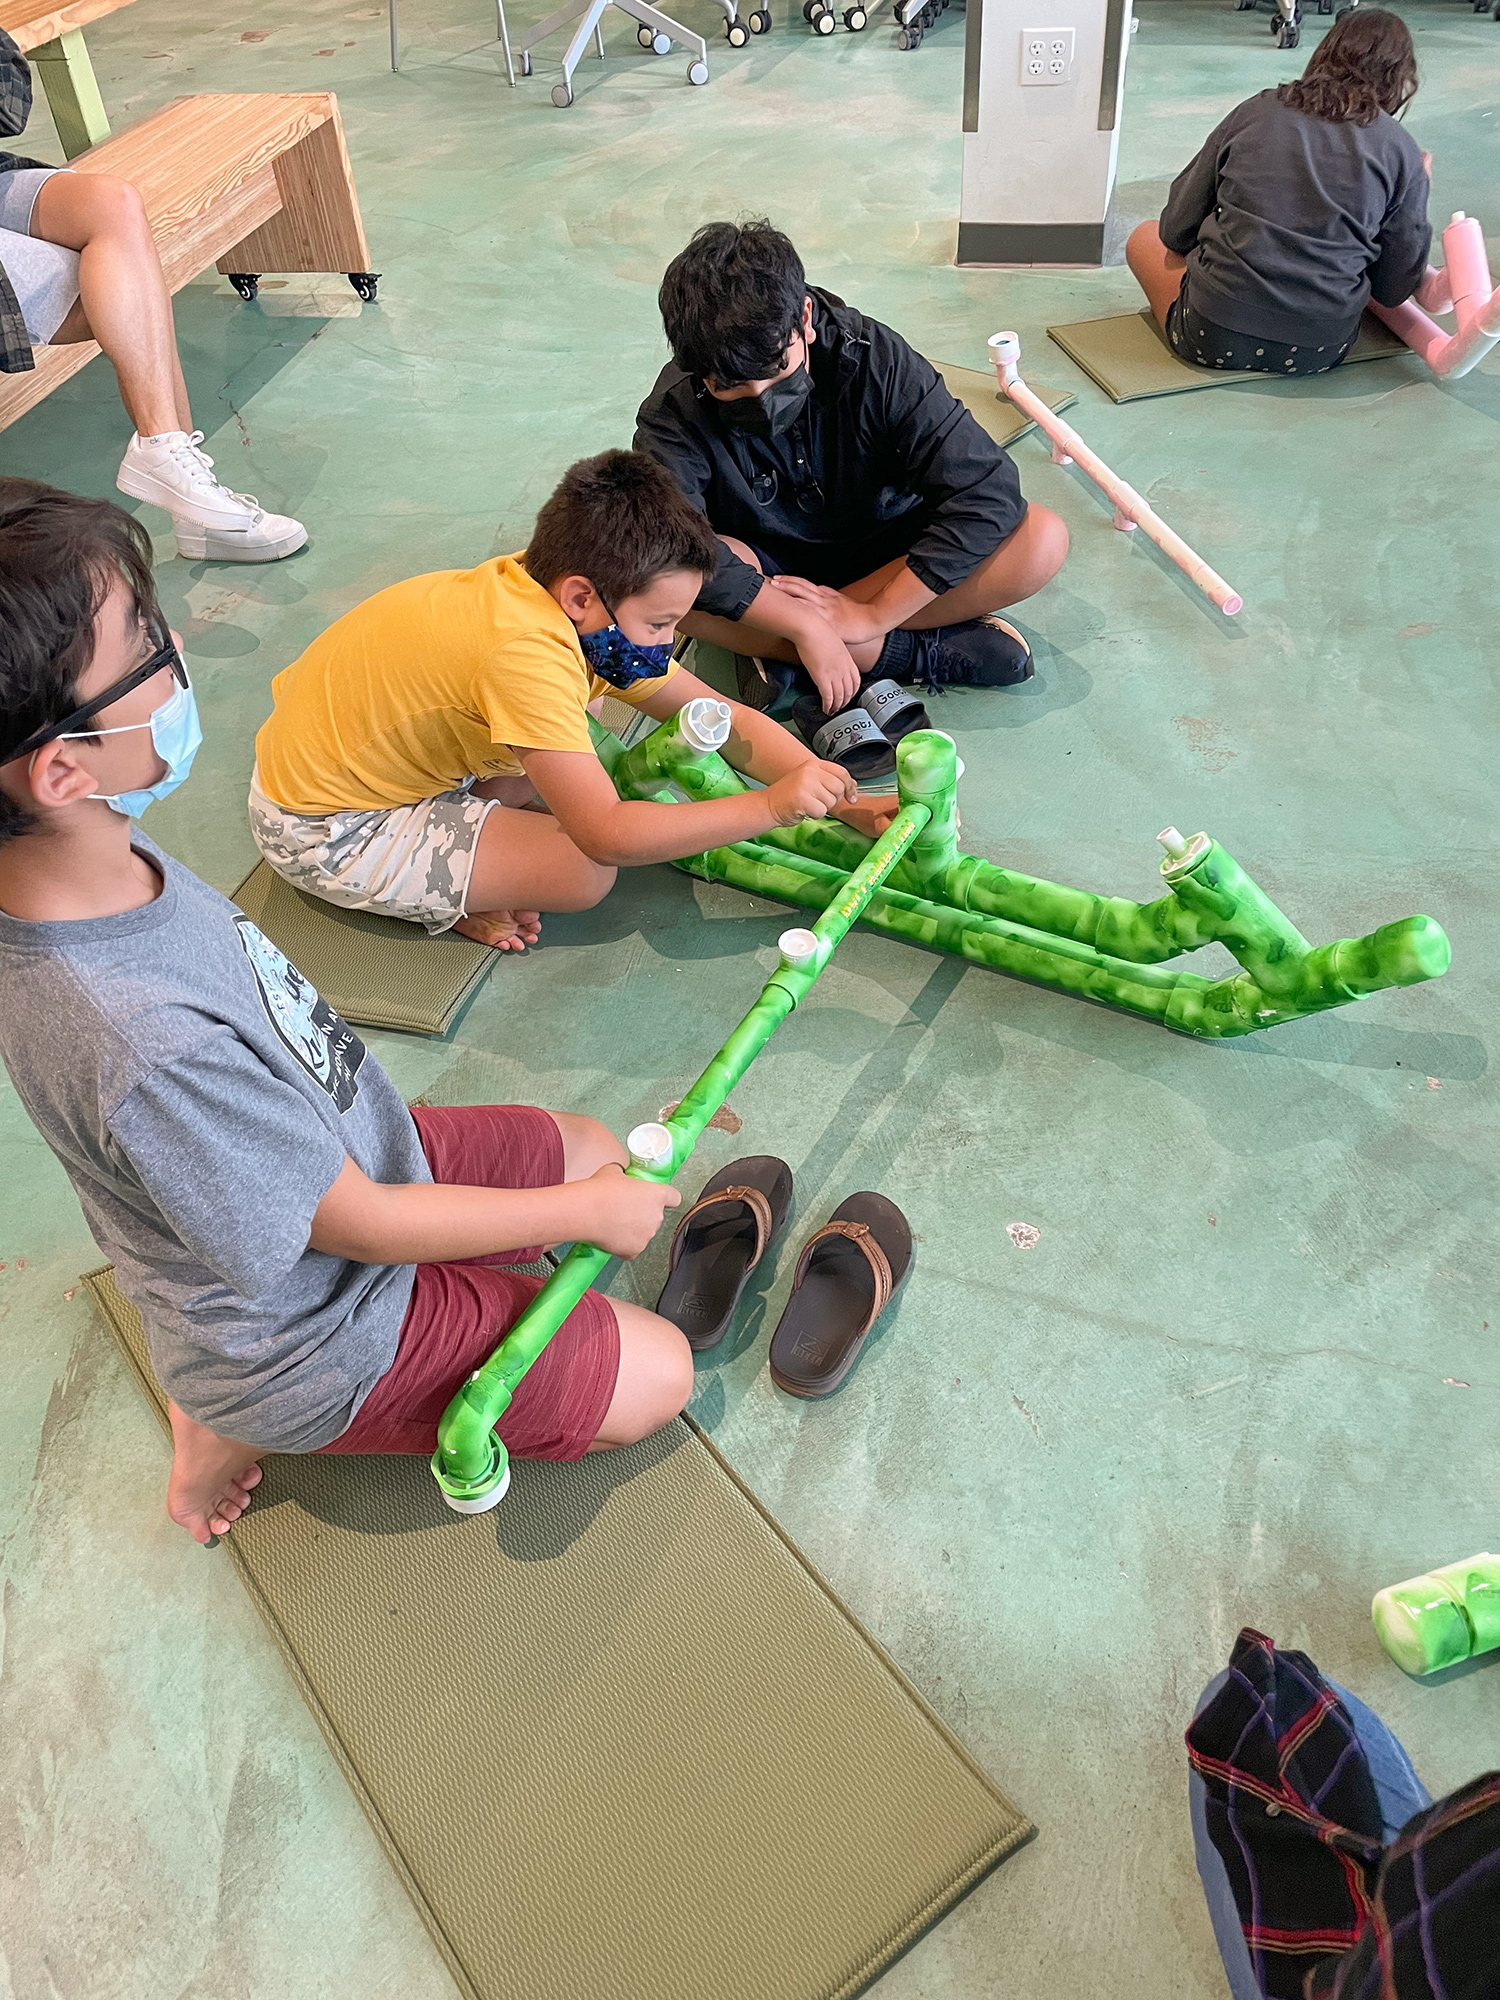 Three school-age children are sitting on the floor working together to build a canoe prototype our of PVC pipe.